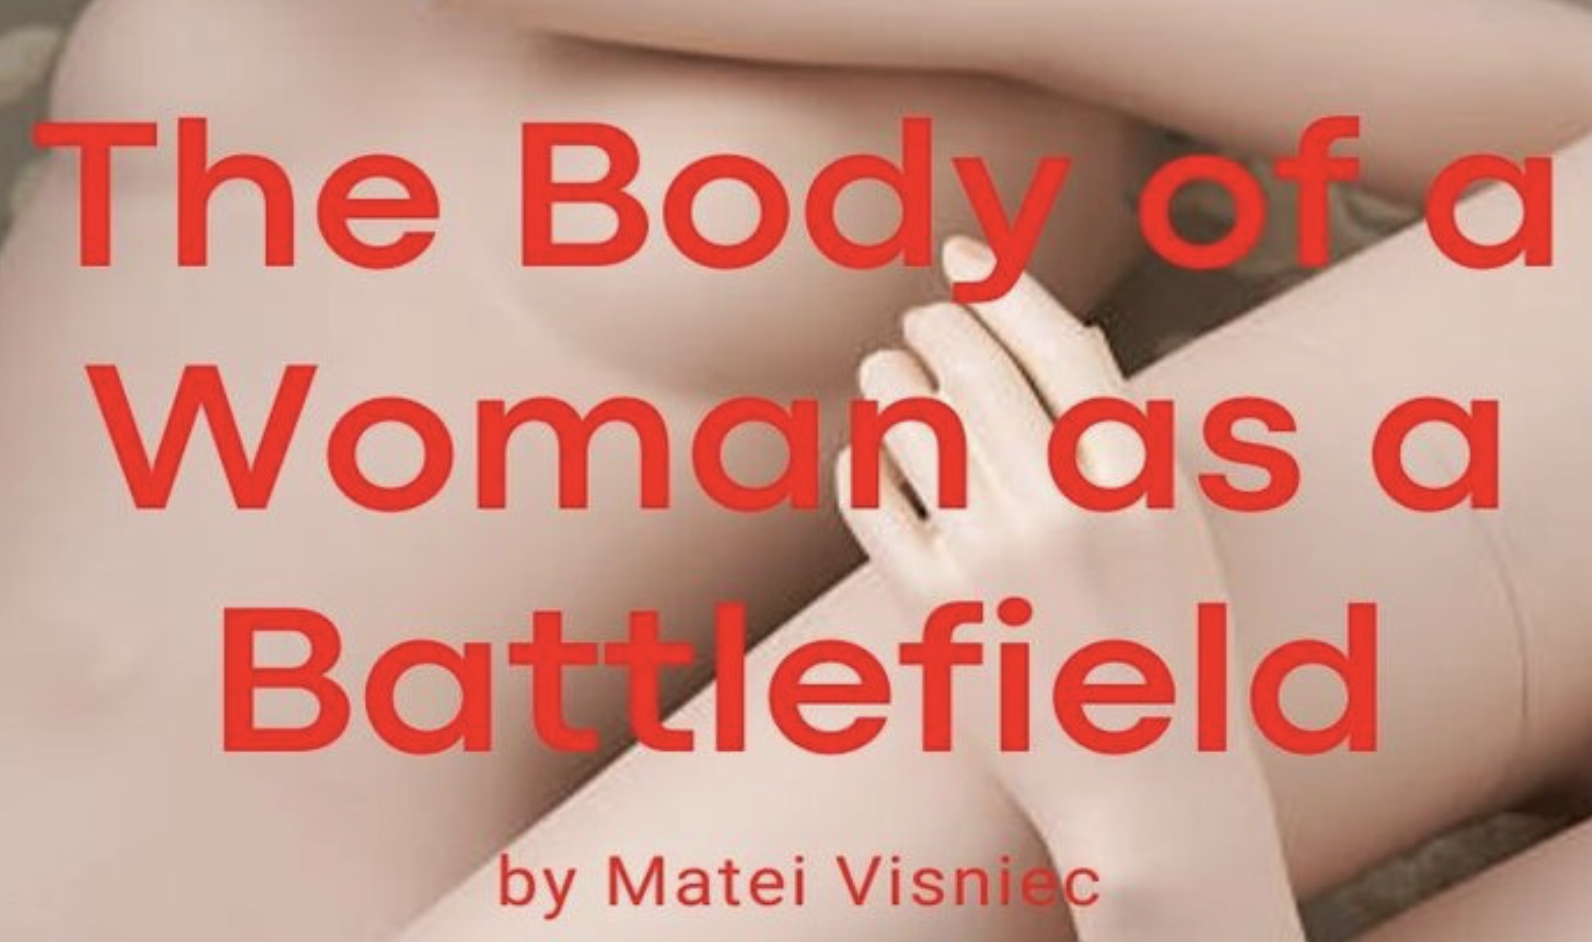 The Body of a Woman as a Battlefield premiere